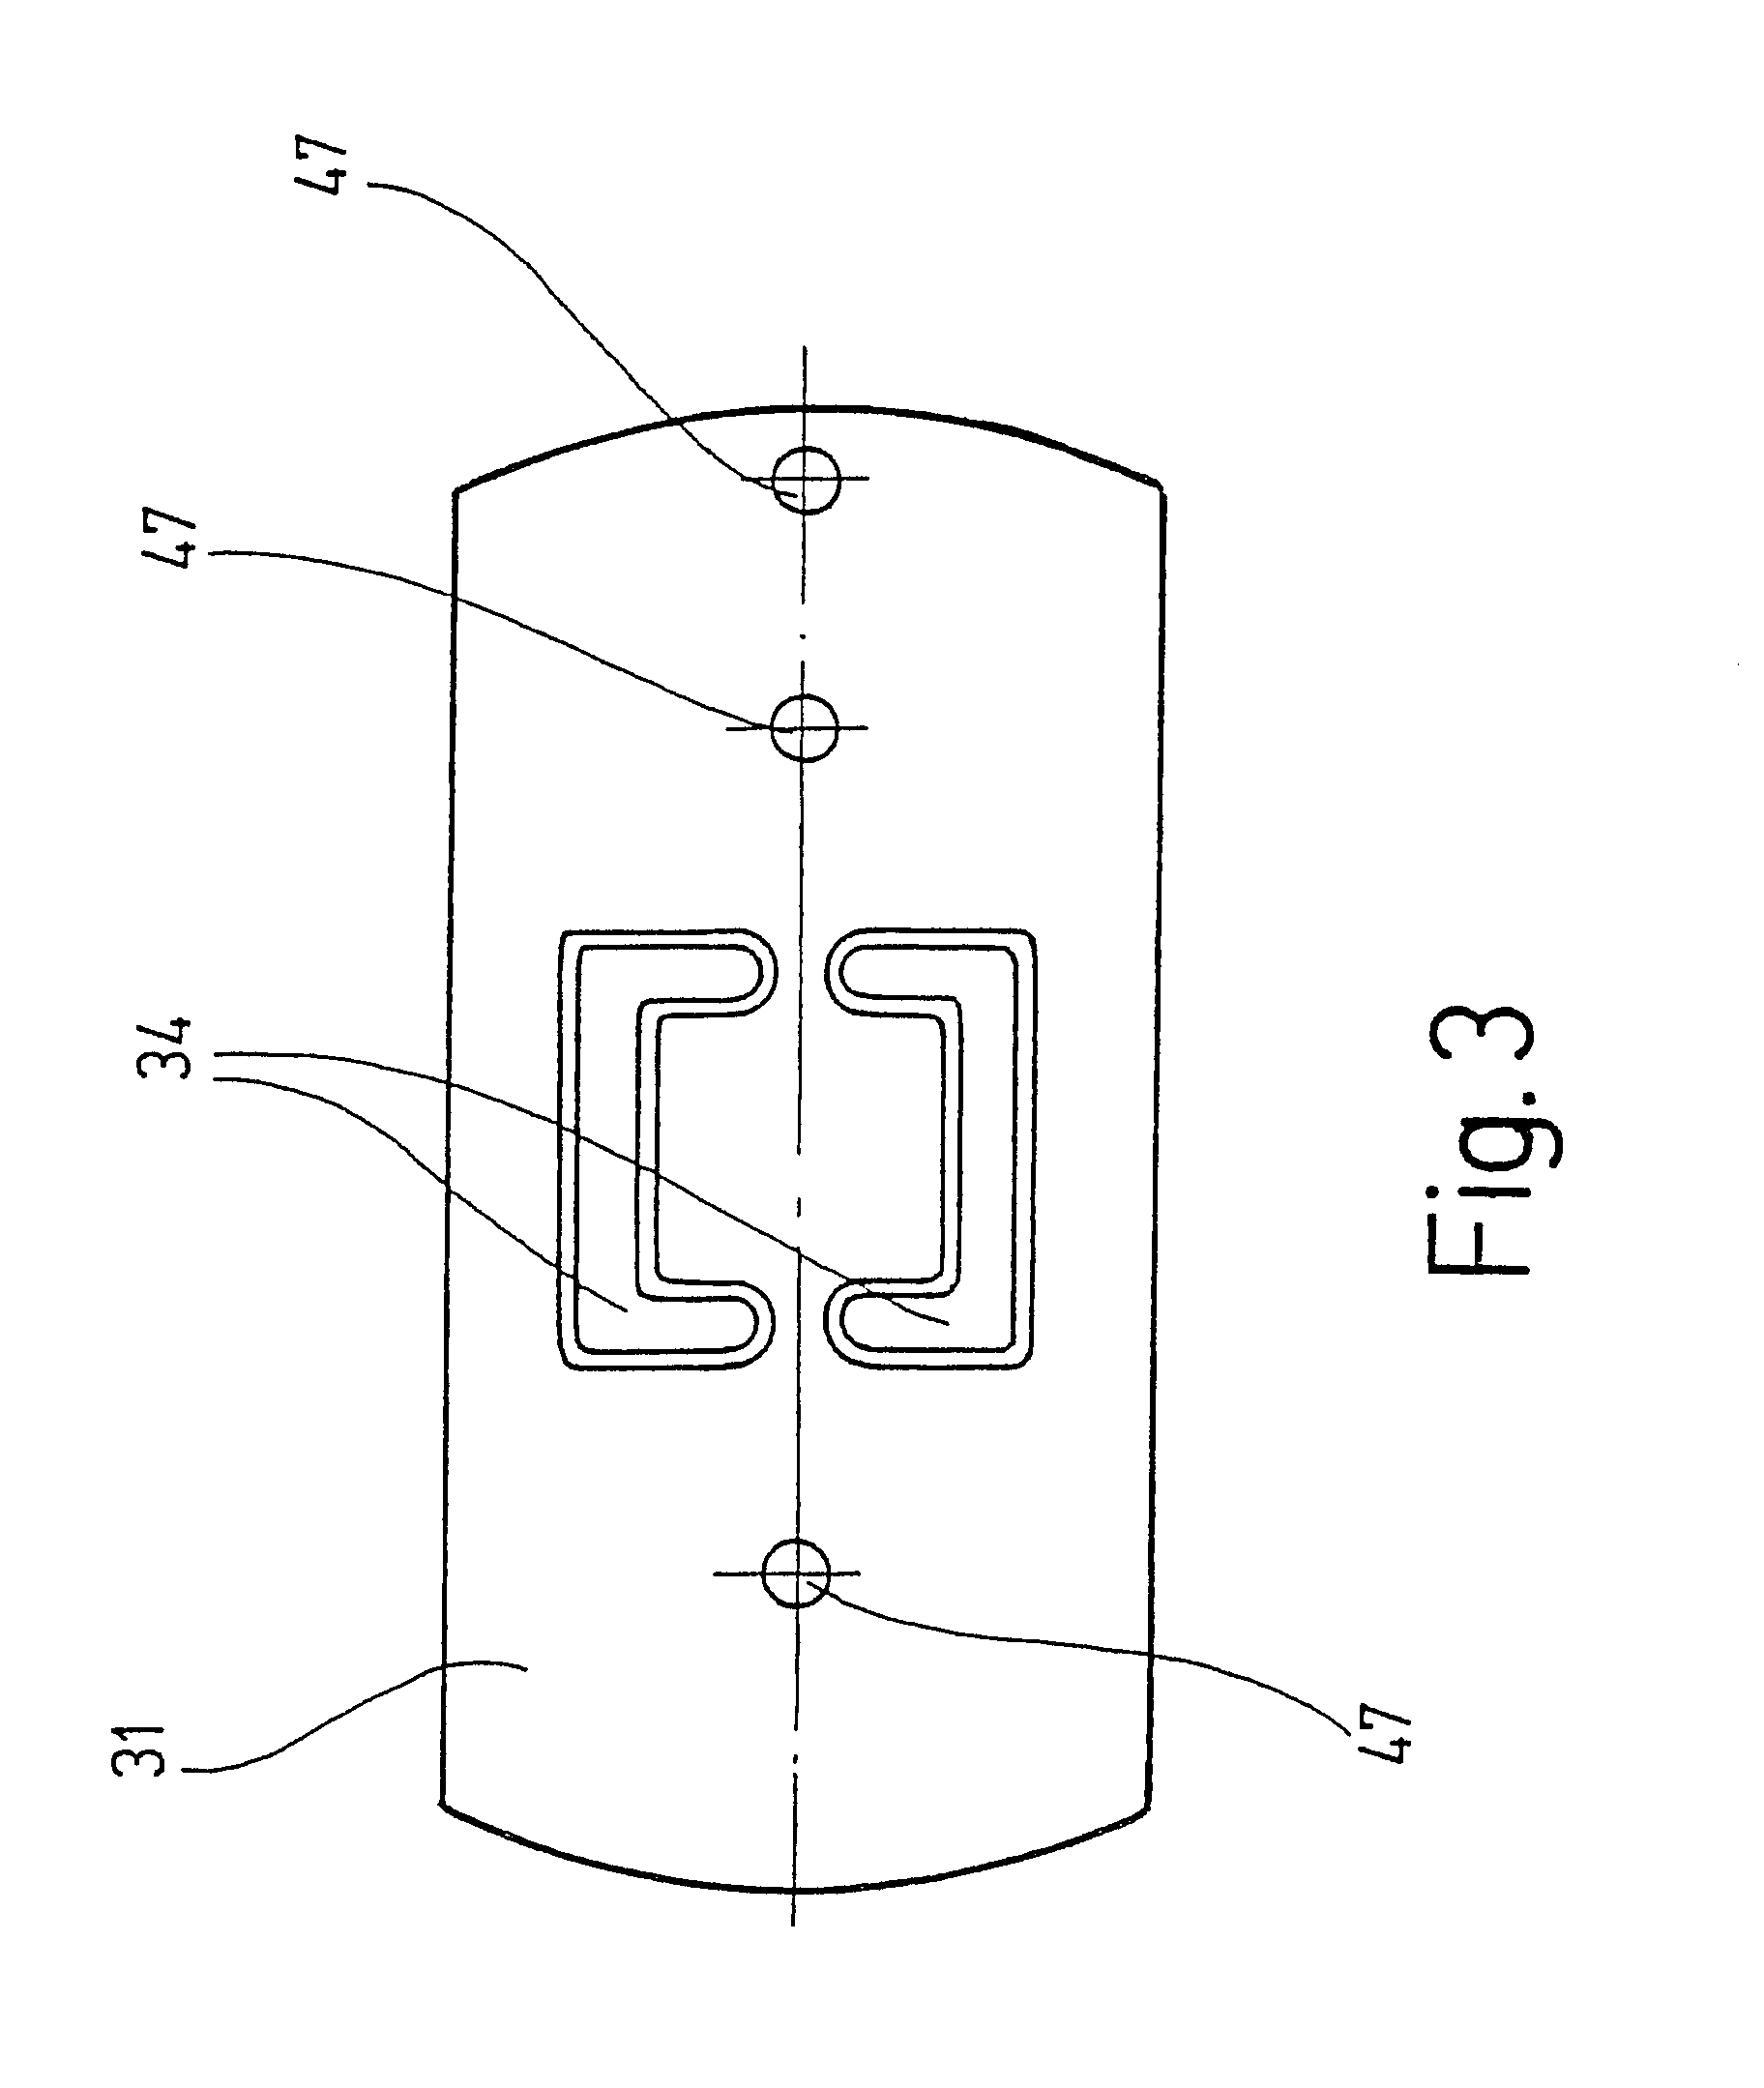 Valve for metered introduction of volatilized fuel